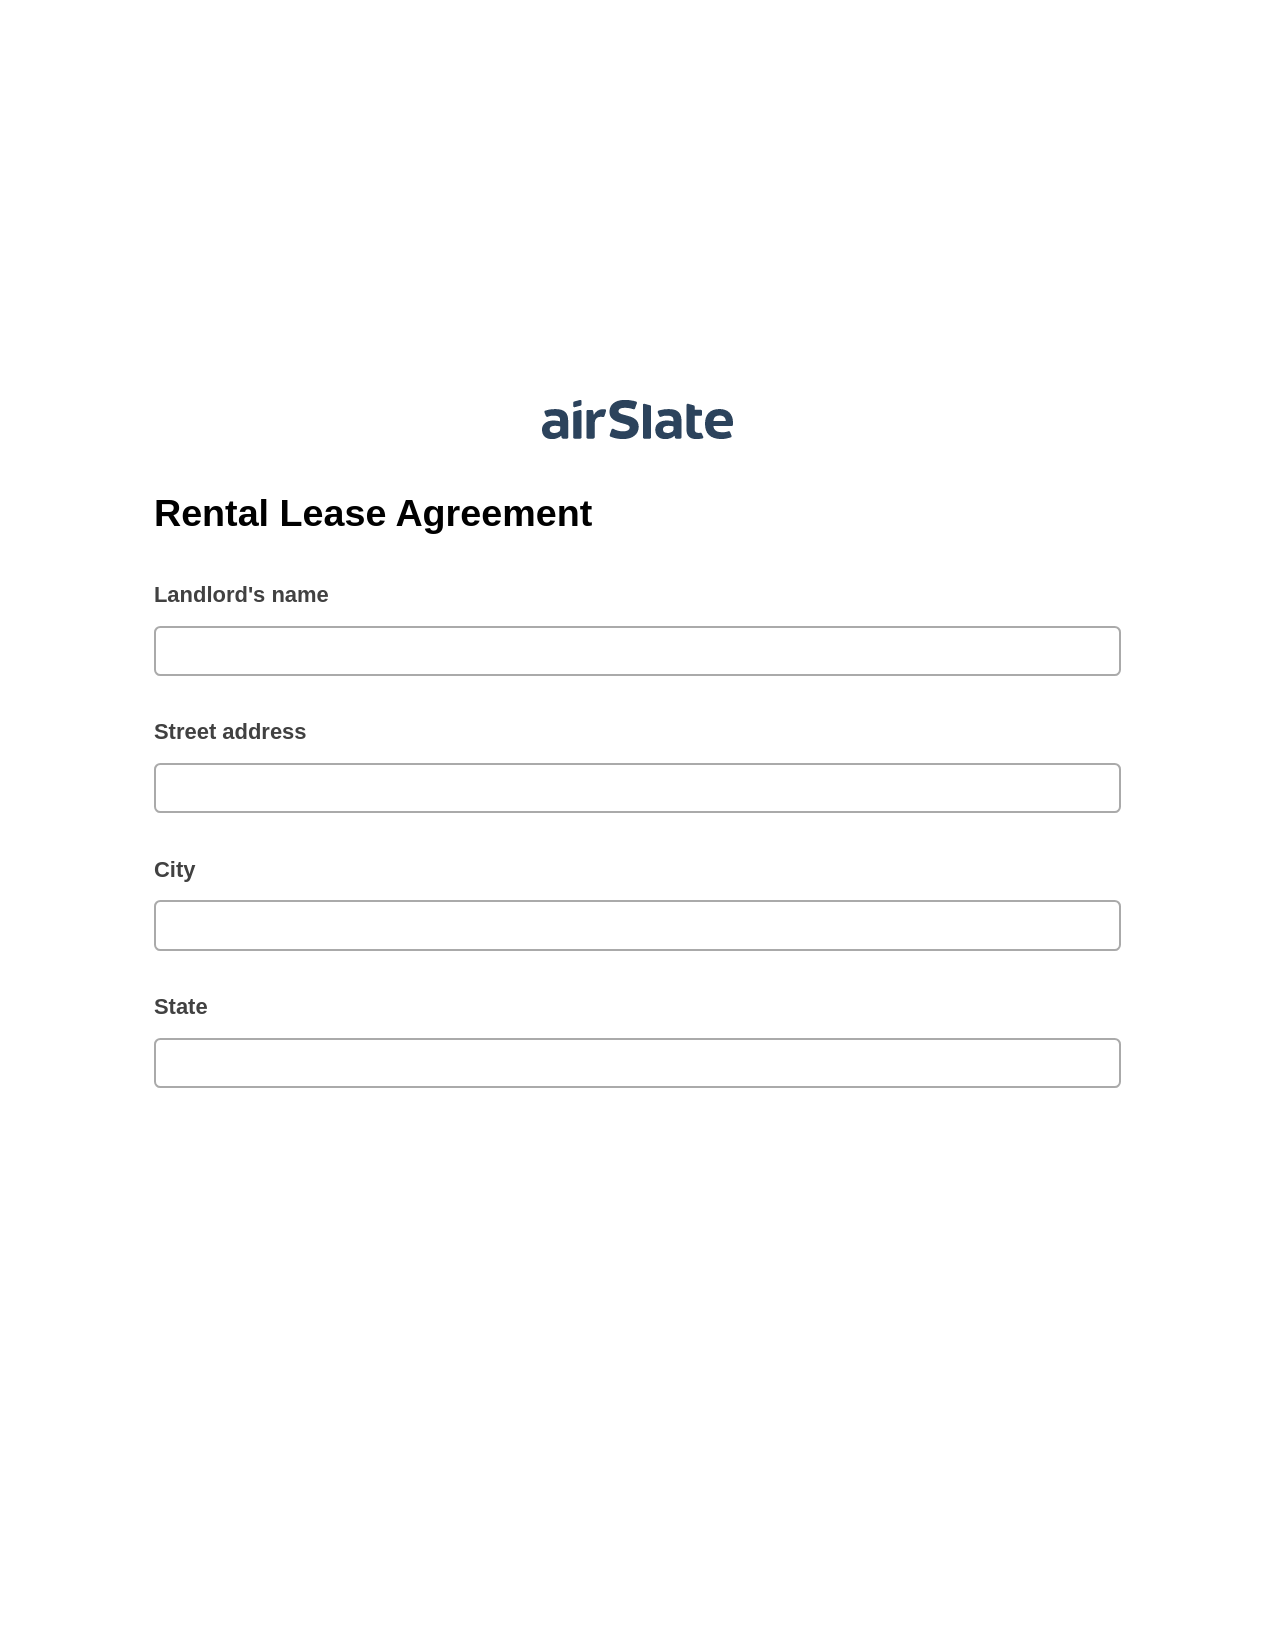 Rental Lease Agreement Pre-fill from Litmos bot, Add Tags to Slate Bot, Export to Smartsheet